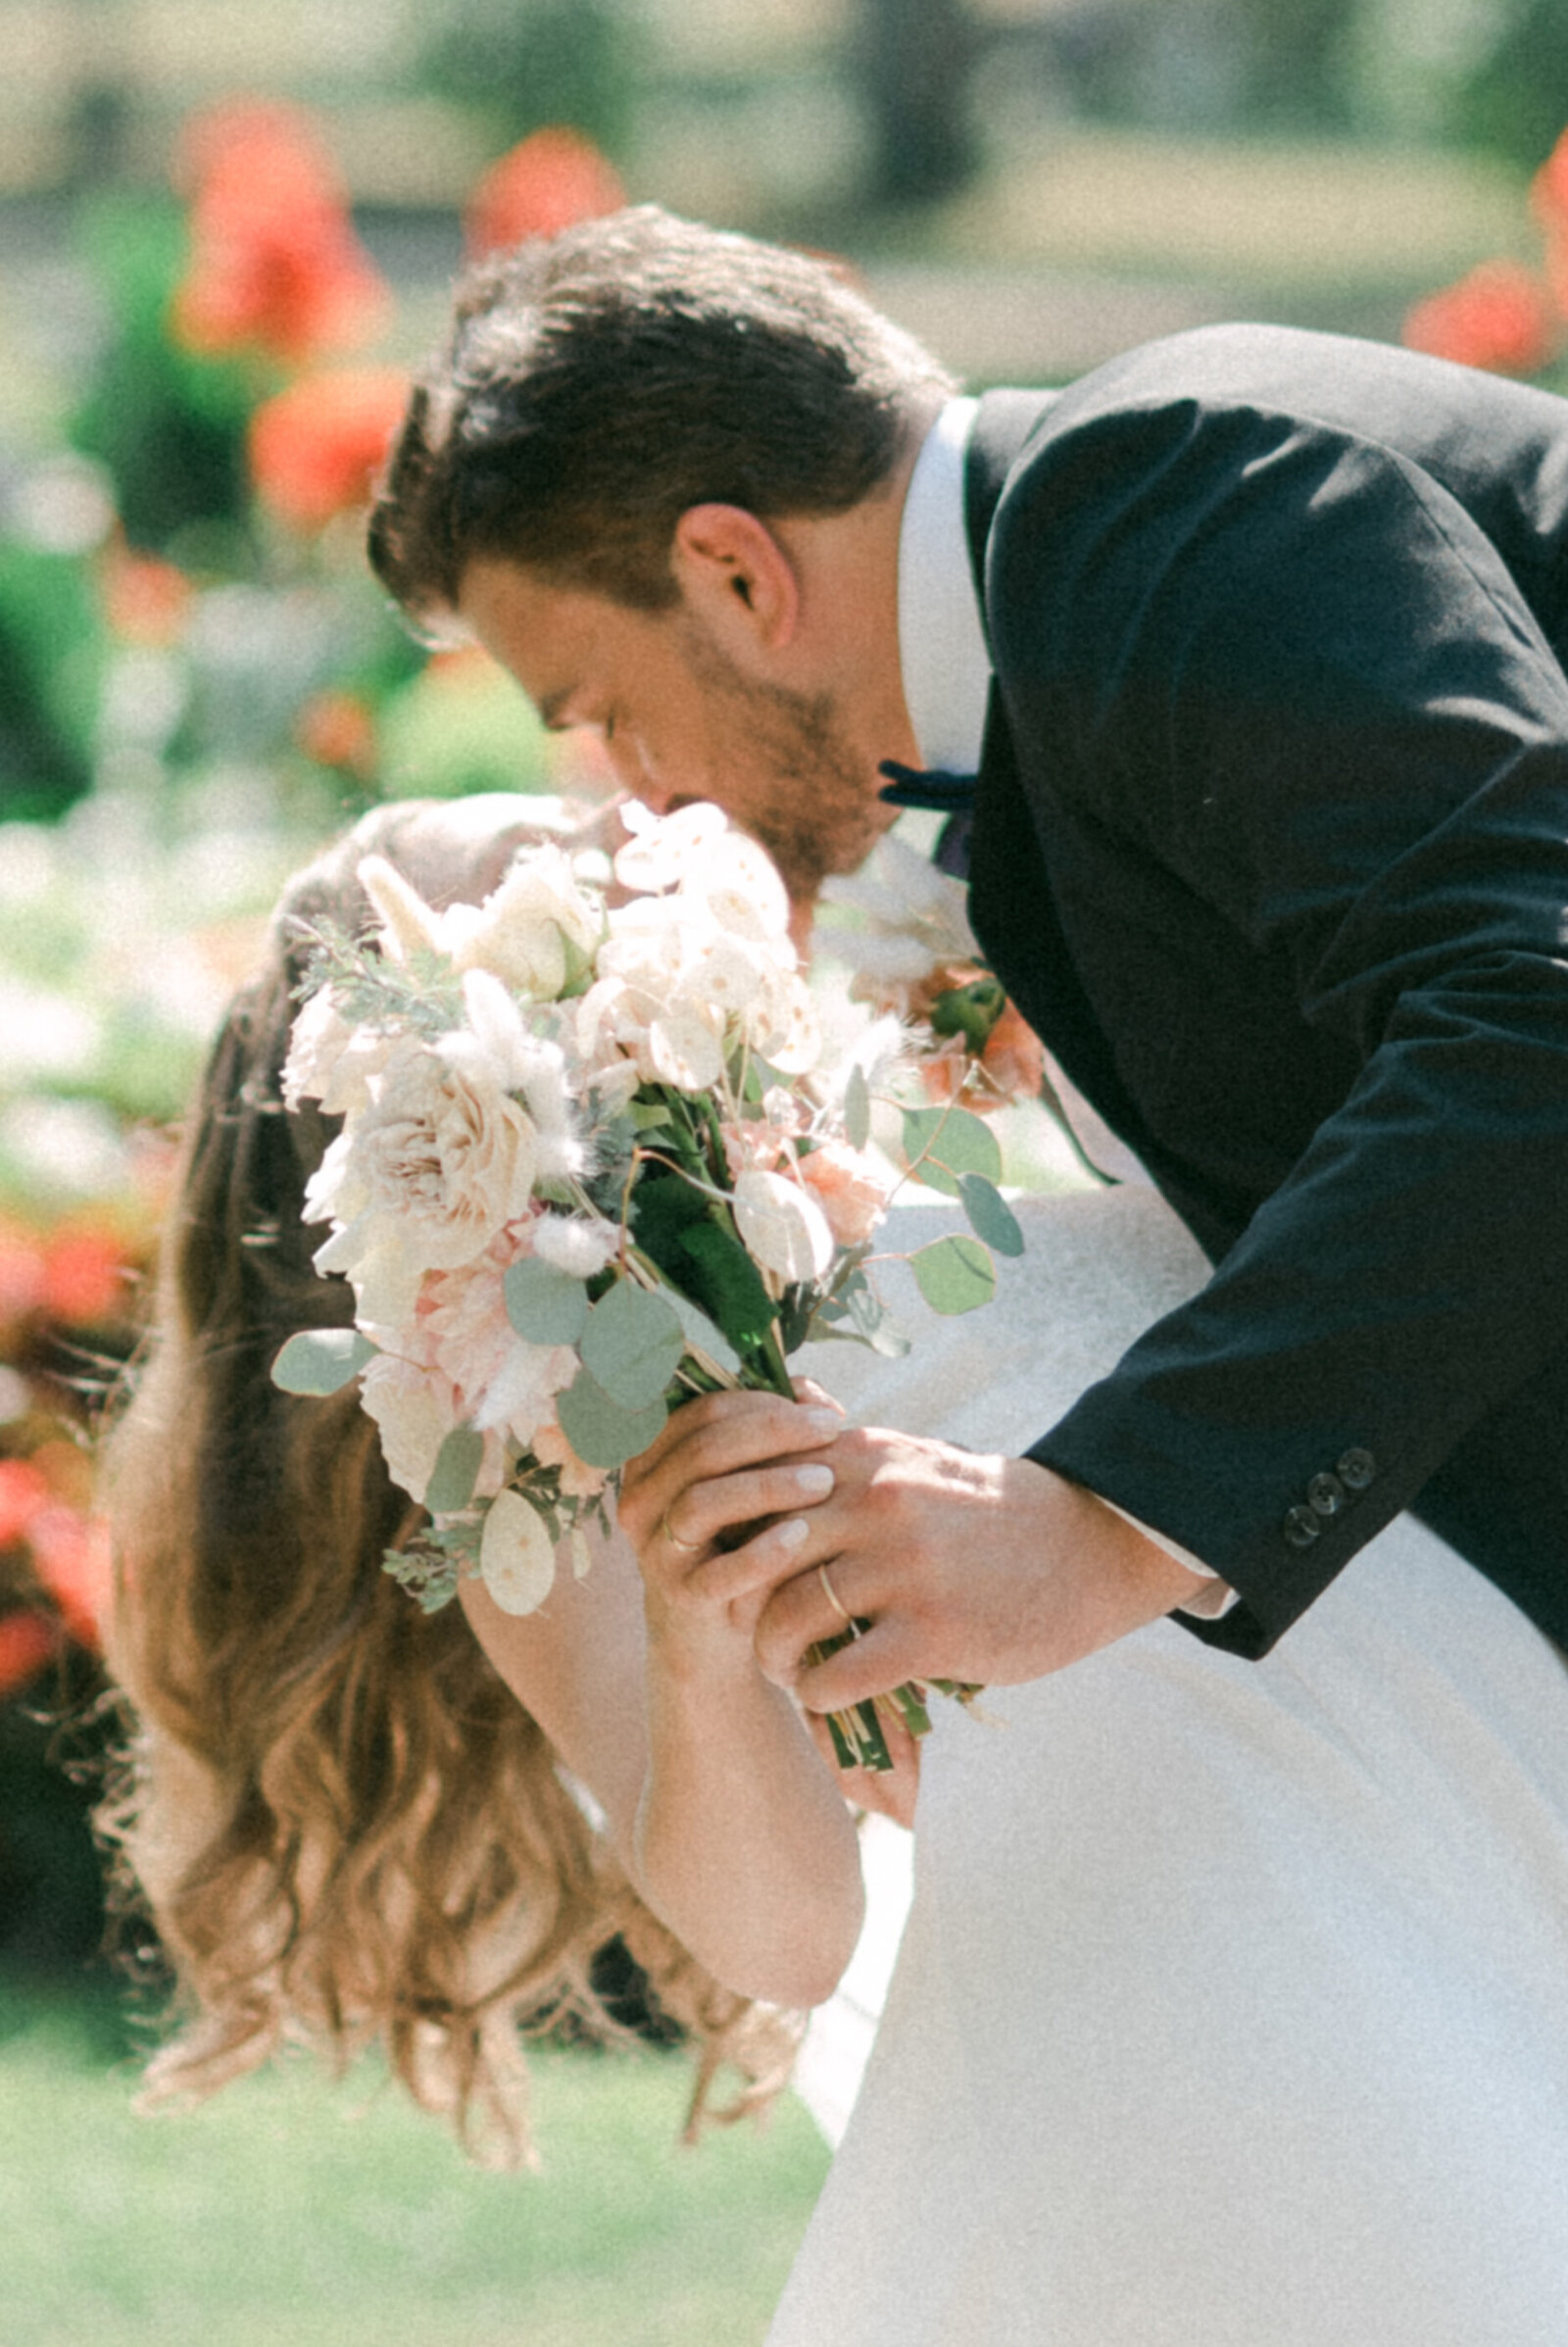 A wedding couple kissing behind a bouquet in a photograph captured by wedding photographer Hannika Gabrielsson.